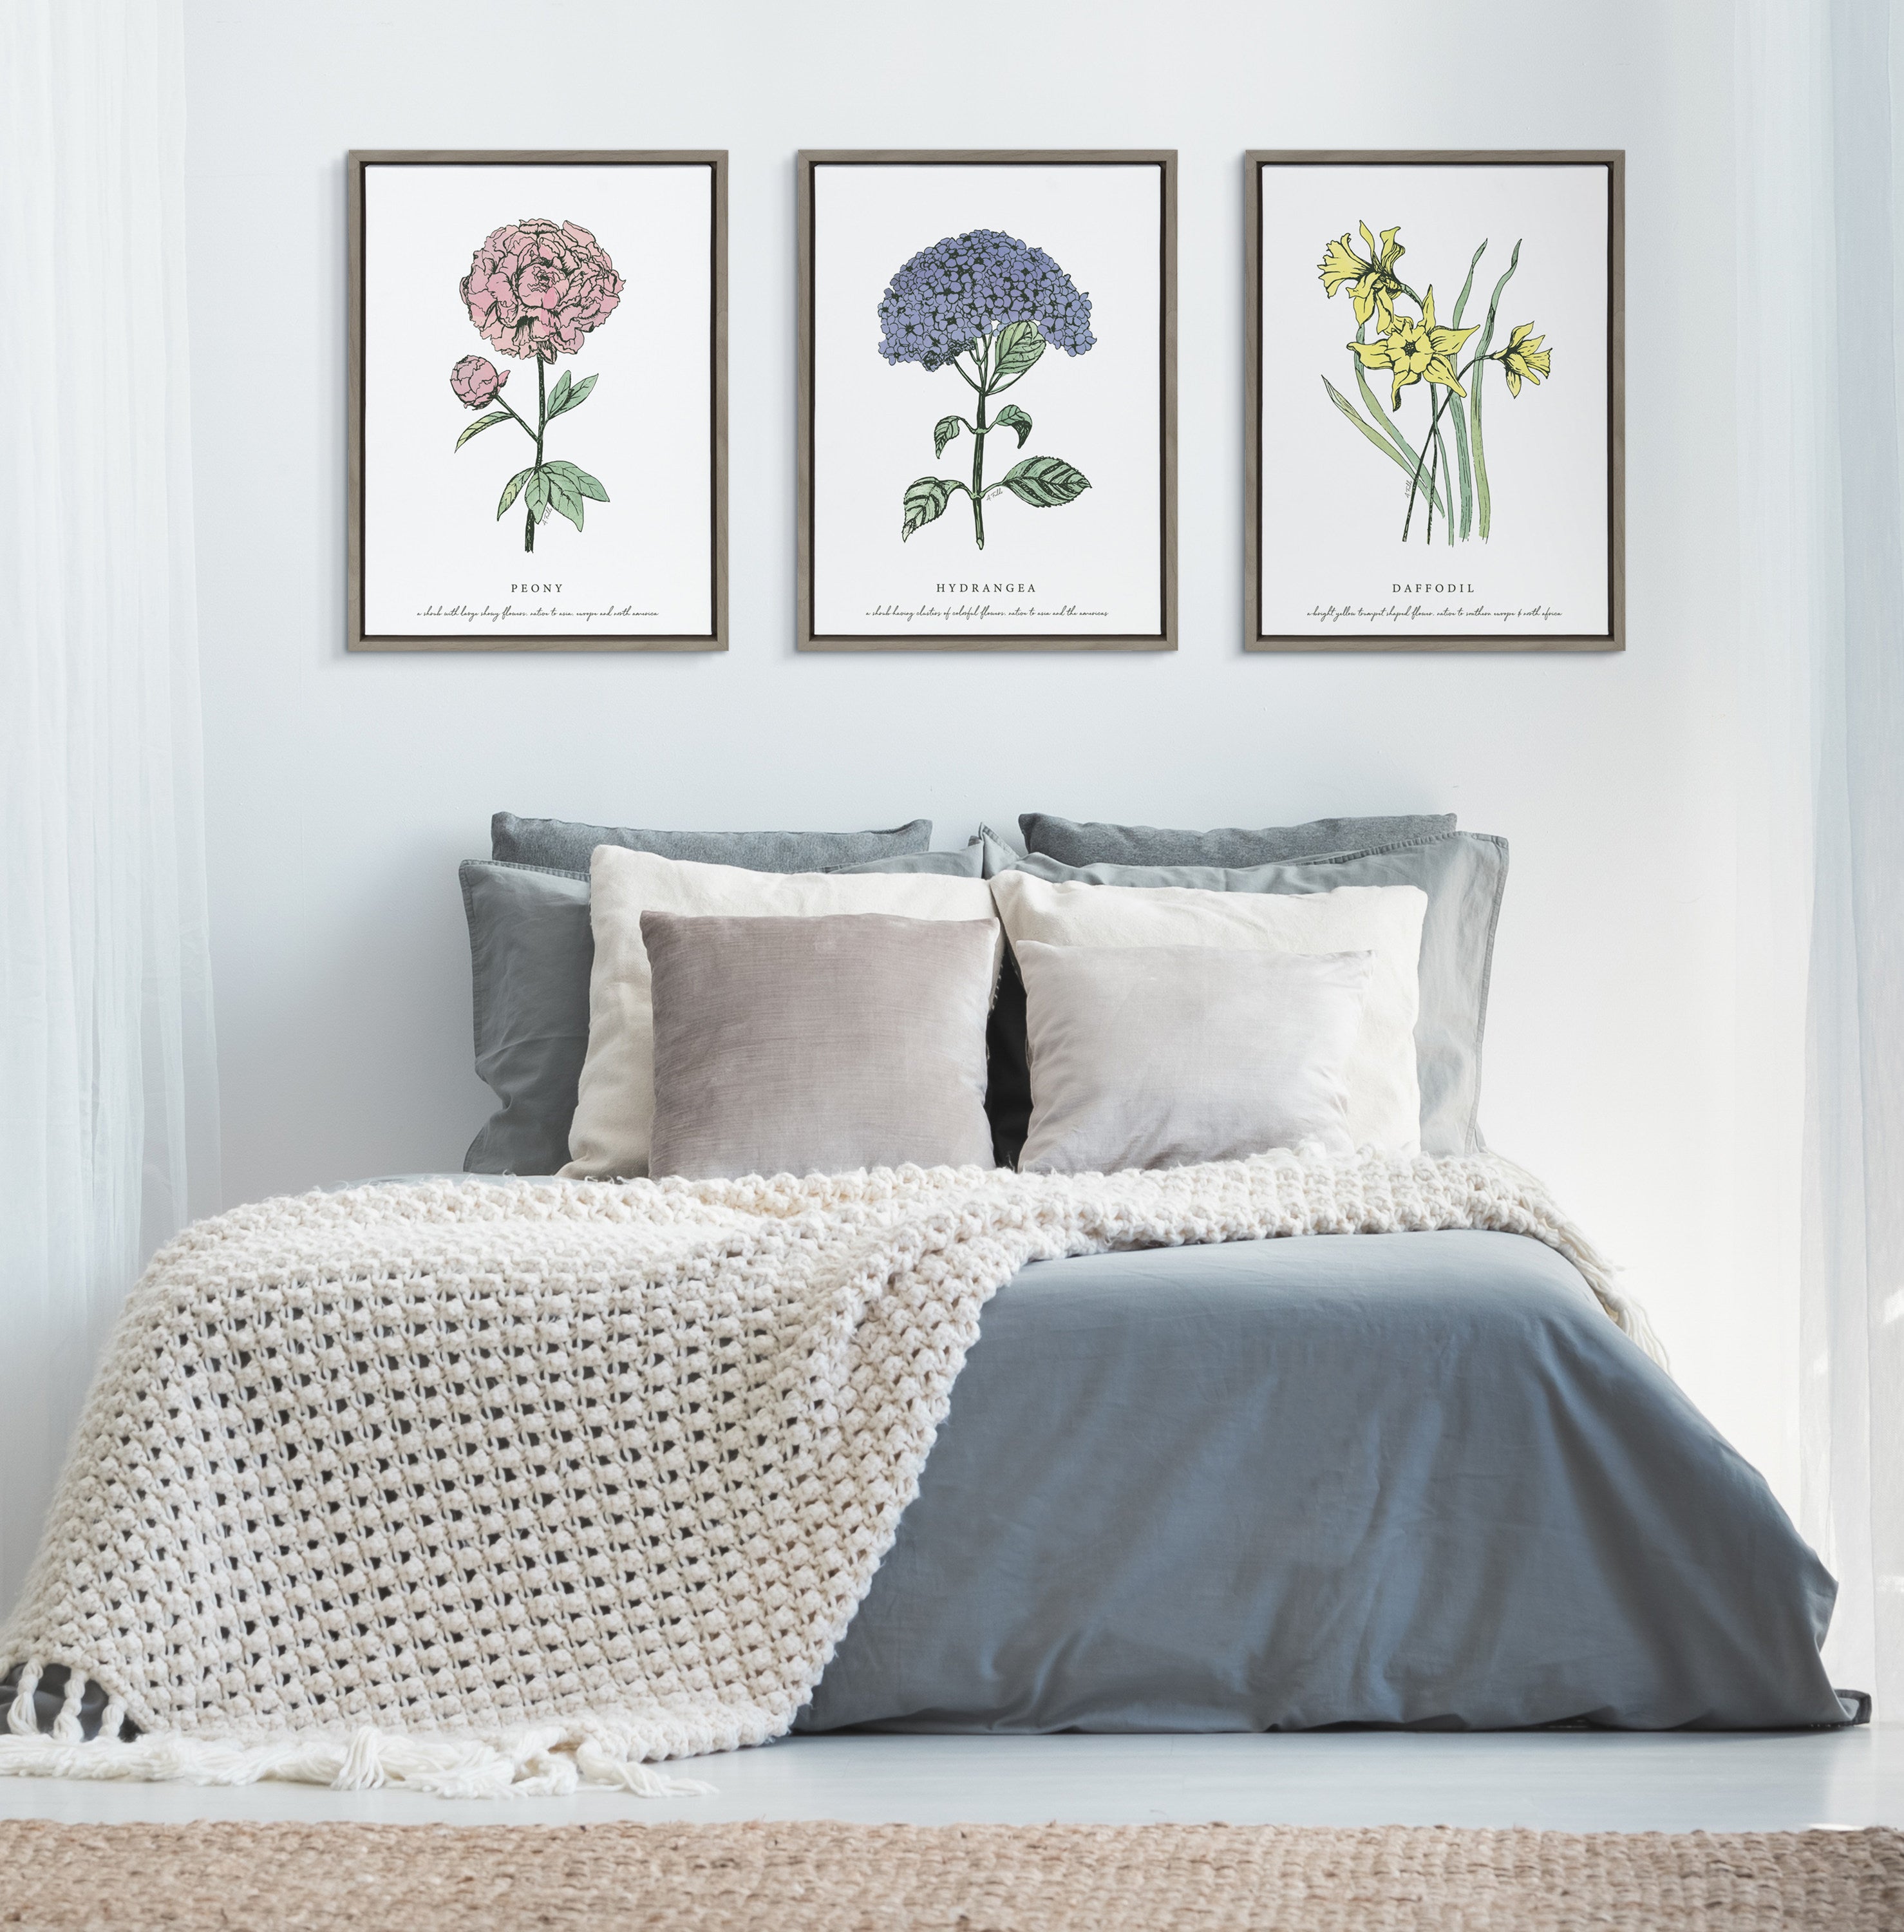 Sylvie Spring Daffodil Framed Canvas by Statement Goods